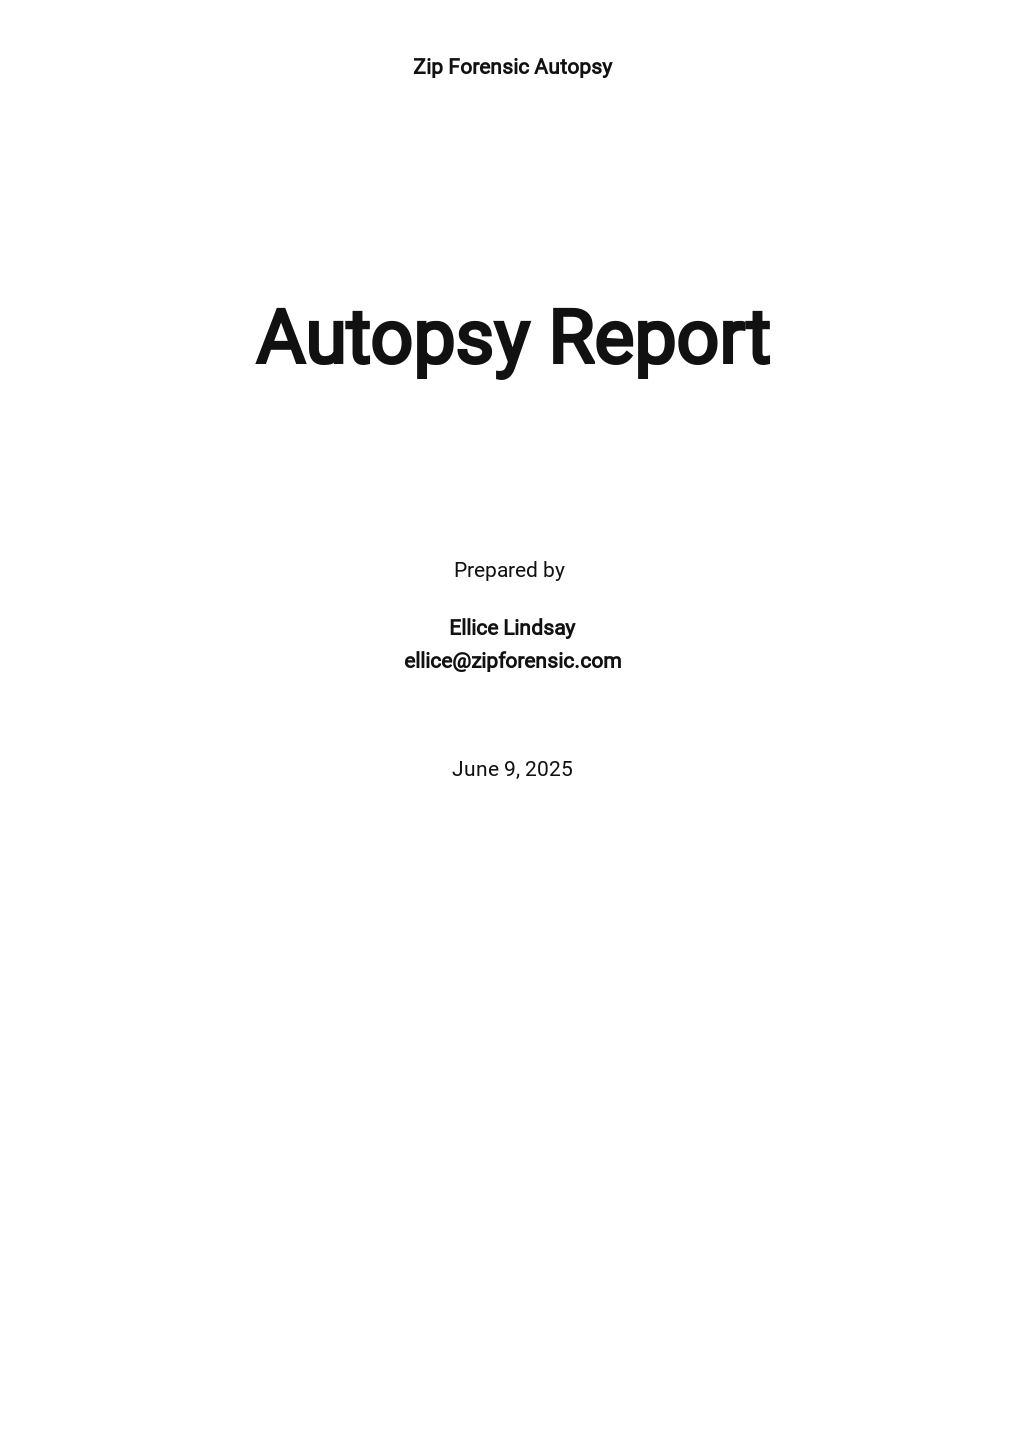 Autopsy Report Template in Google Docs, Word  Template.net In Blank Autopsy Report Template